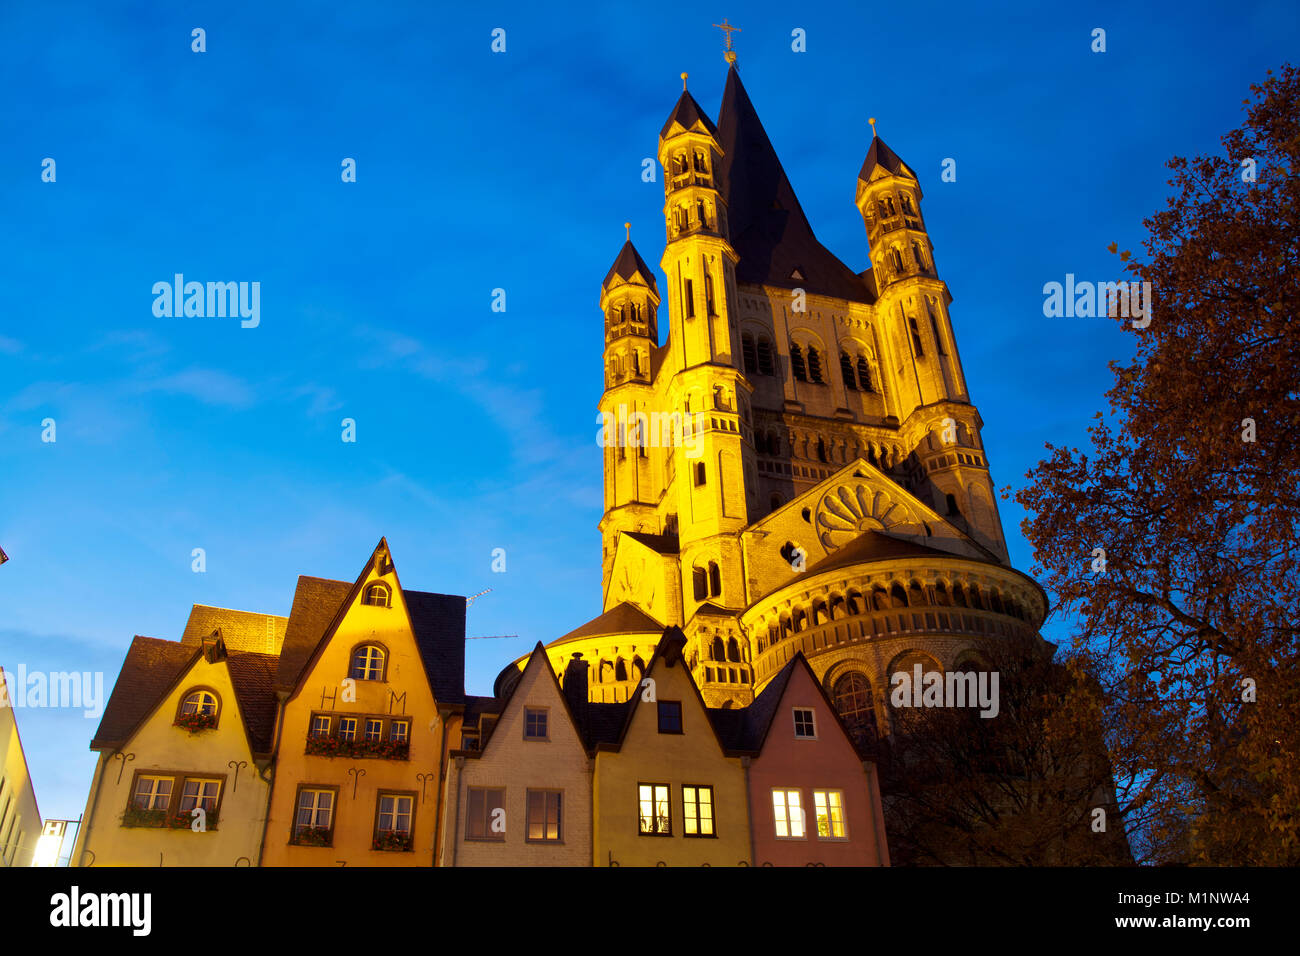 Germany, Cologne, the Fishmarket in the old part of the town, houses in front of the romanesque church Gross St. Martin.  Deutschland, Koeln, der Fisc Stock Photo